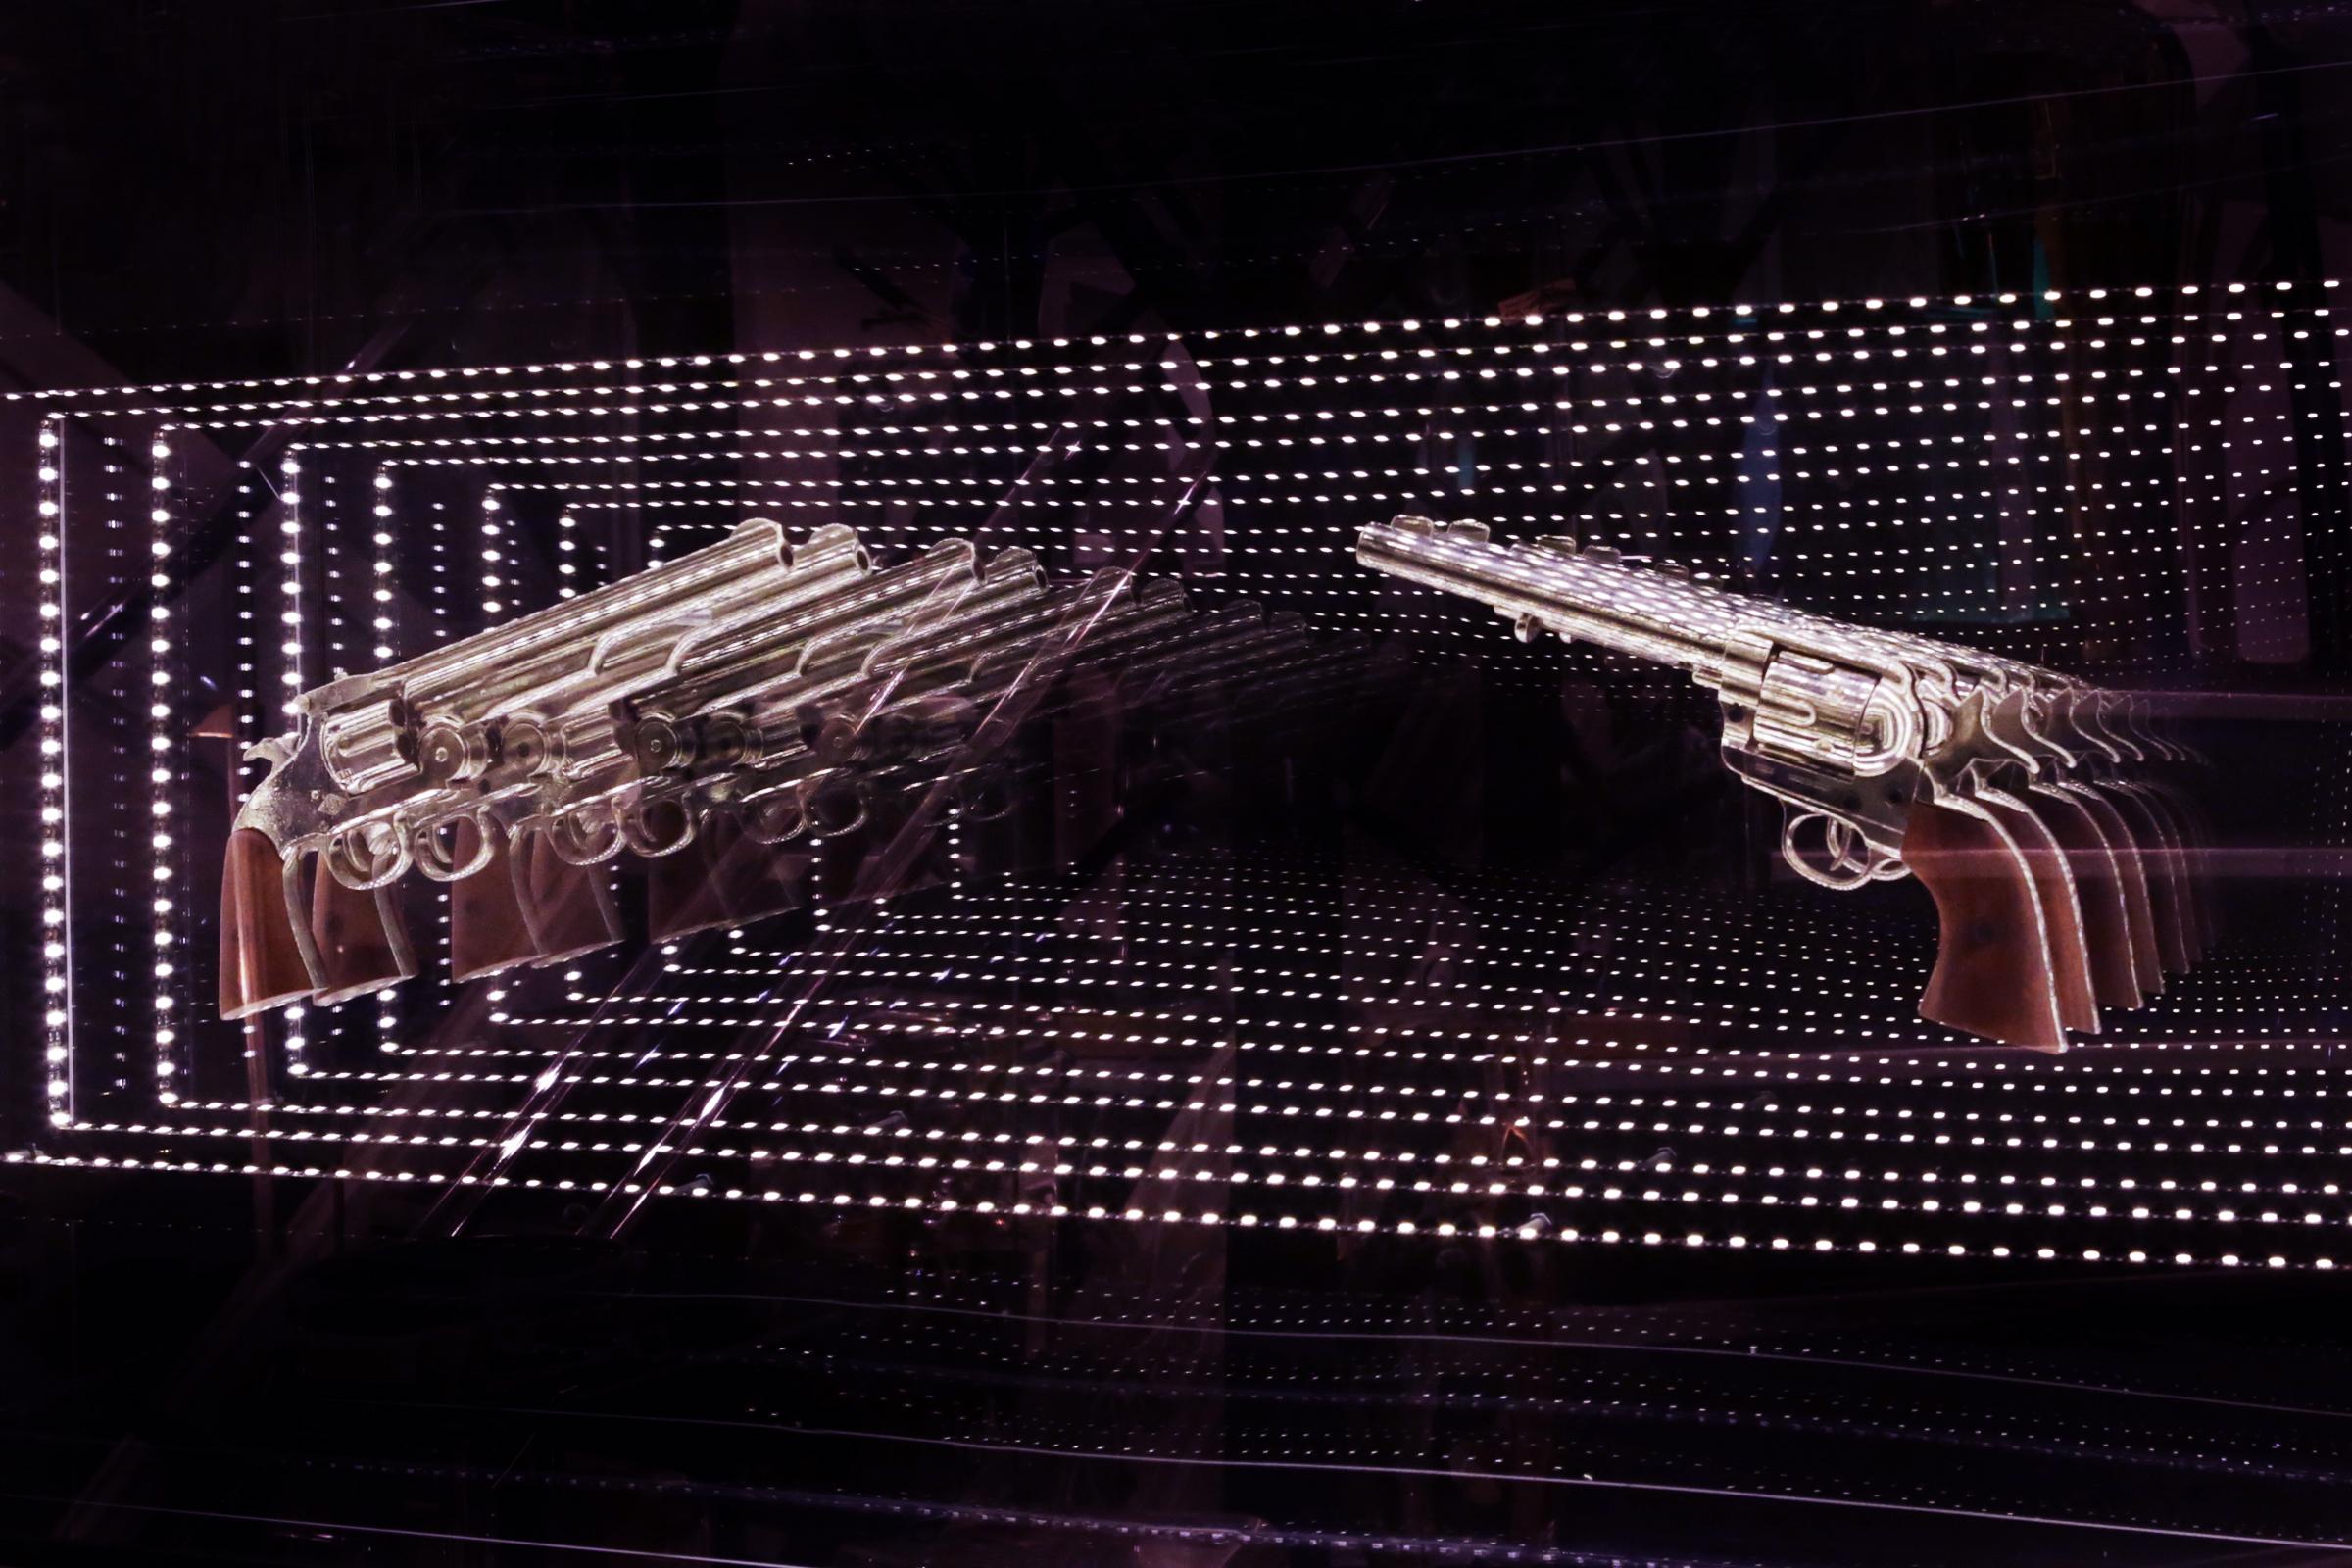 Wall decoration mirror revolver double infiny made with
mirrored led lights with glass and plexiglass creating
an infiny mirrored effect. With a 2 real and exceptional
Colt 45 gun. Unique piece made in France in 2019.